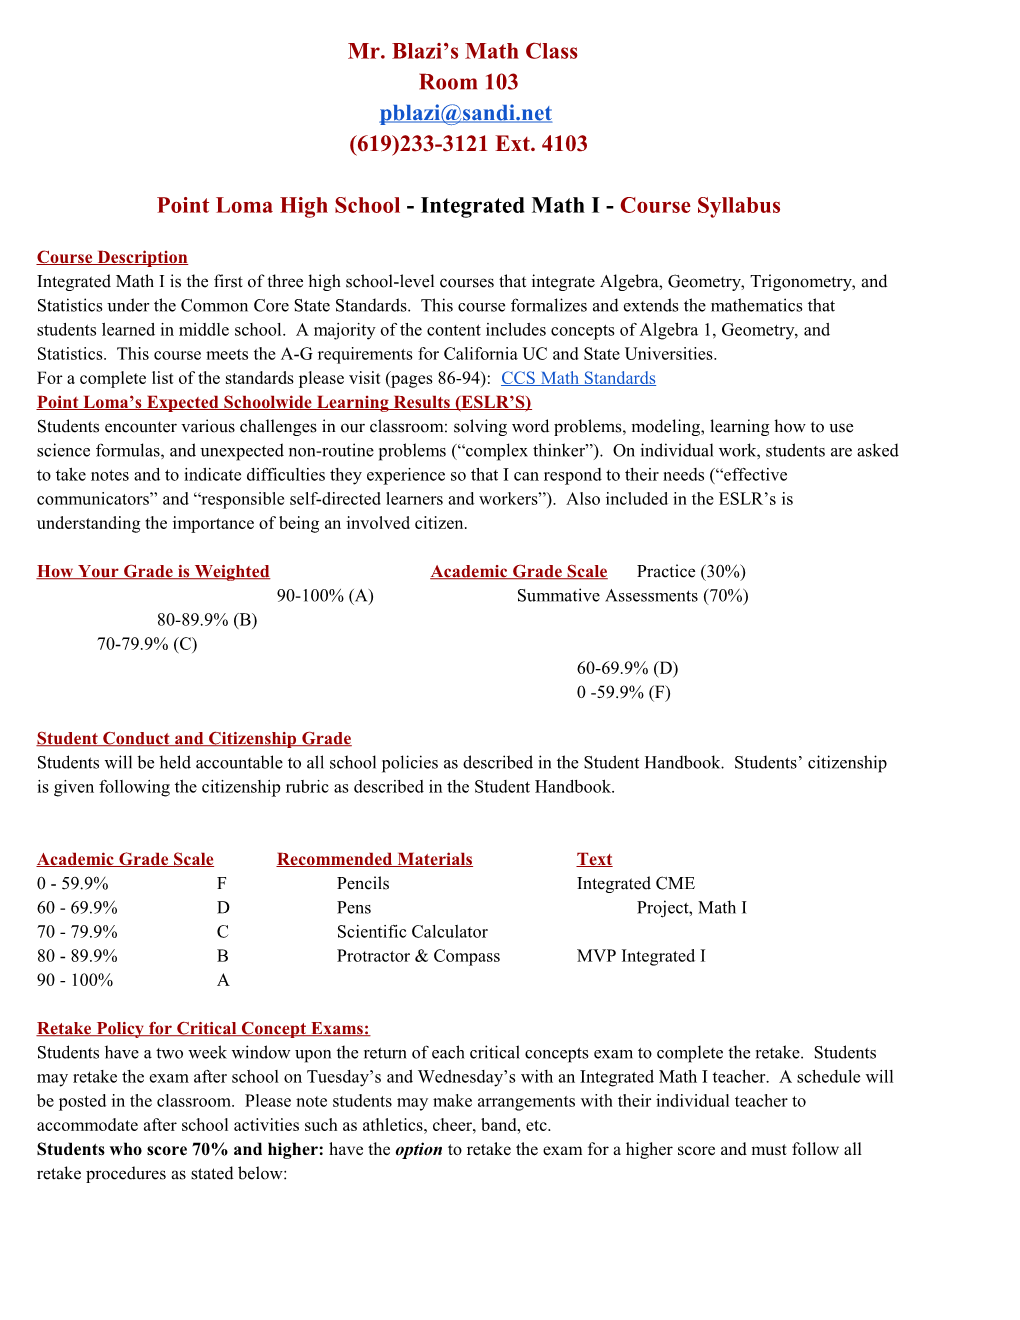 Point Loma High School -Integrated Math I - Course Syllabus